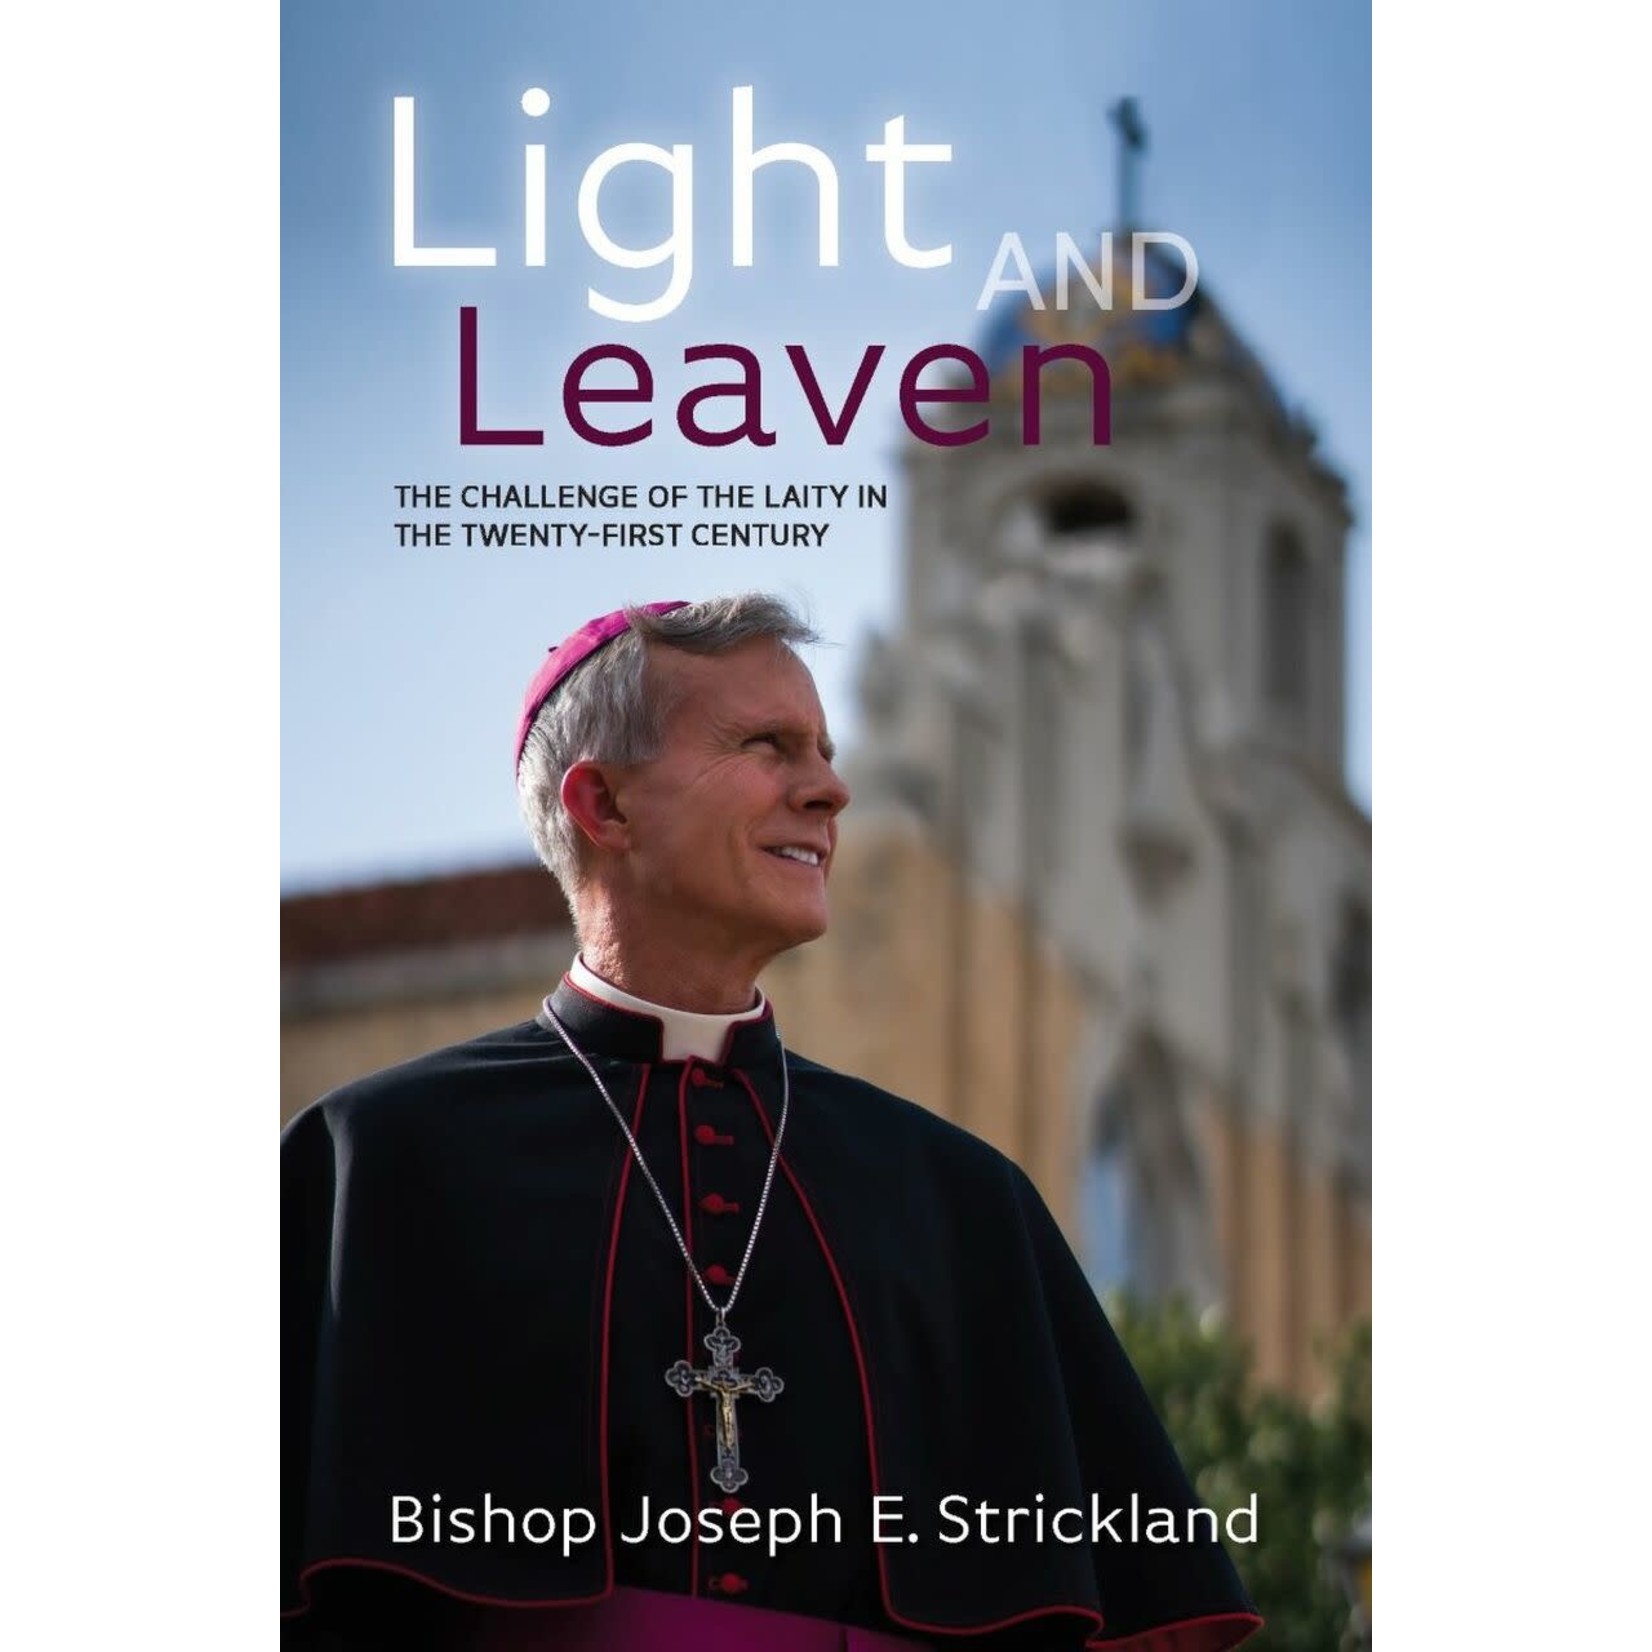 Light and Leaven: The Challenge of the Laity